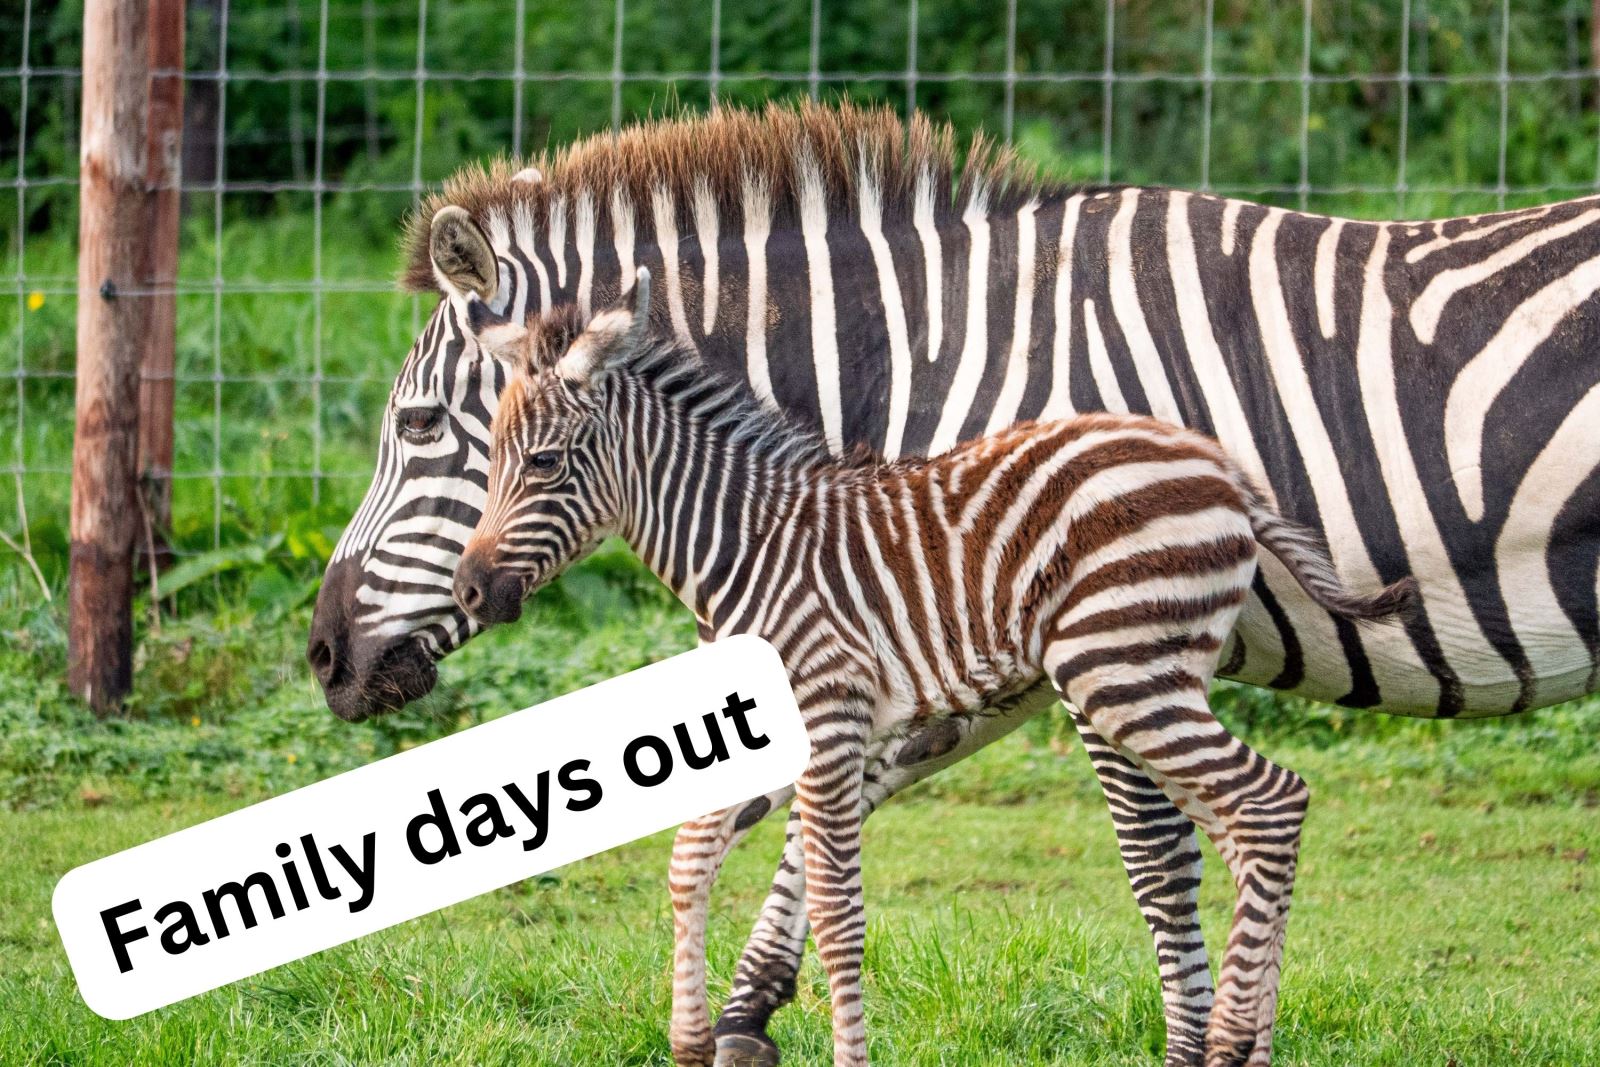 A baby and adult zebra